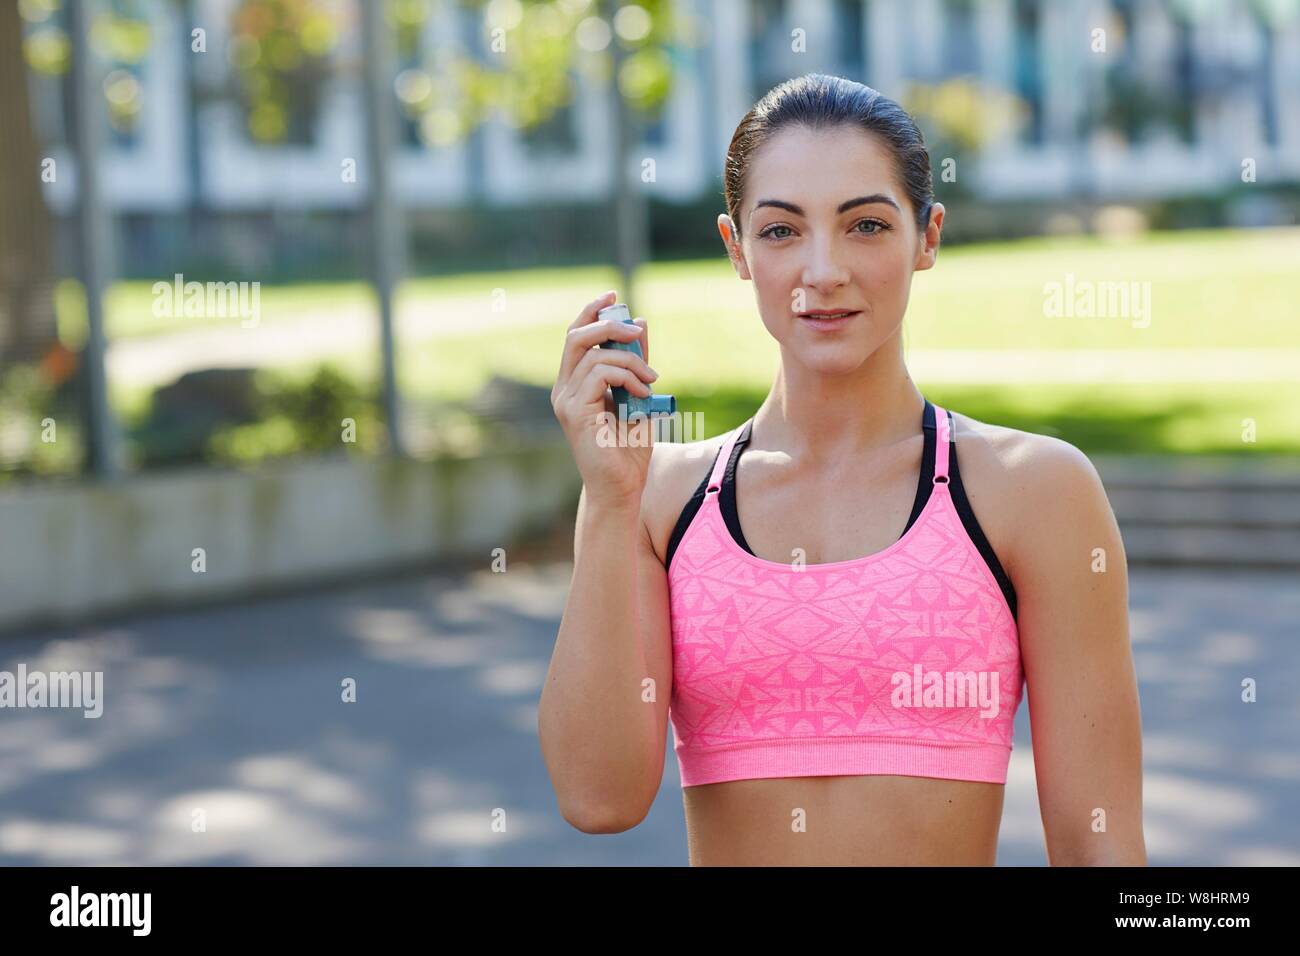 Young woman in sports crop top holding an inhaler. Stock Photo